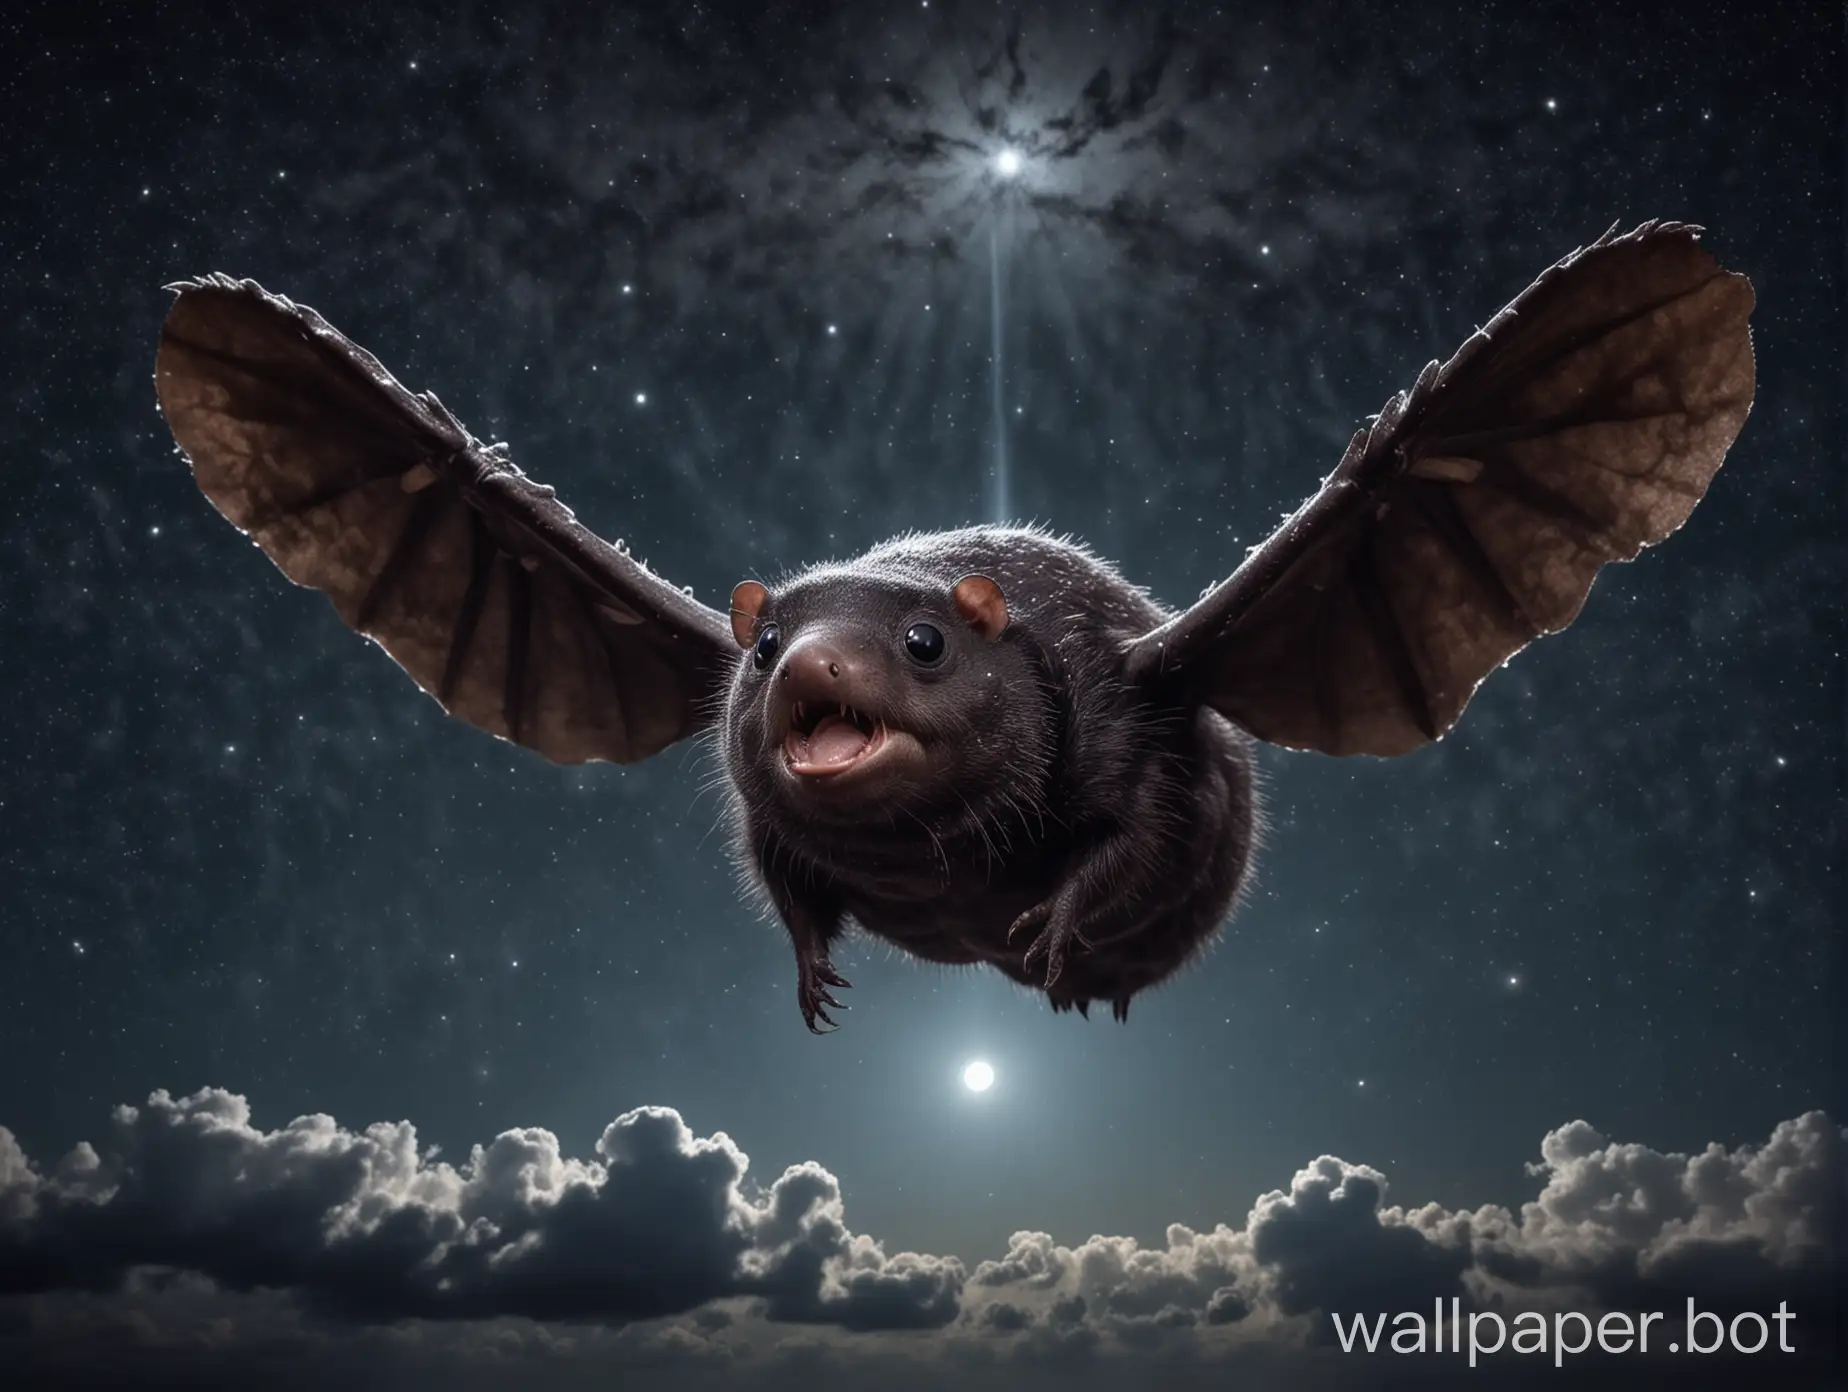 gigantic fanged ominous mole flies in the night sky. full size